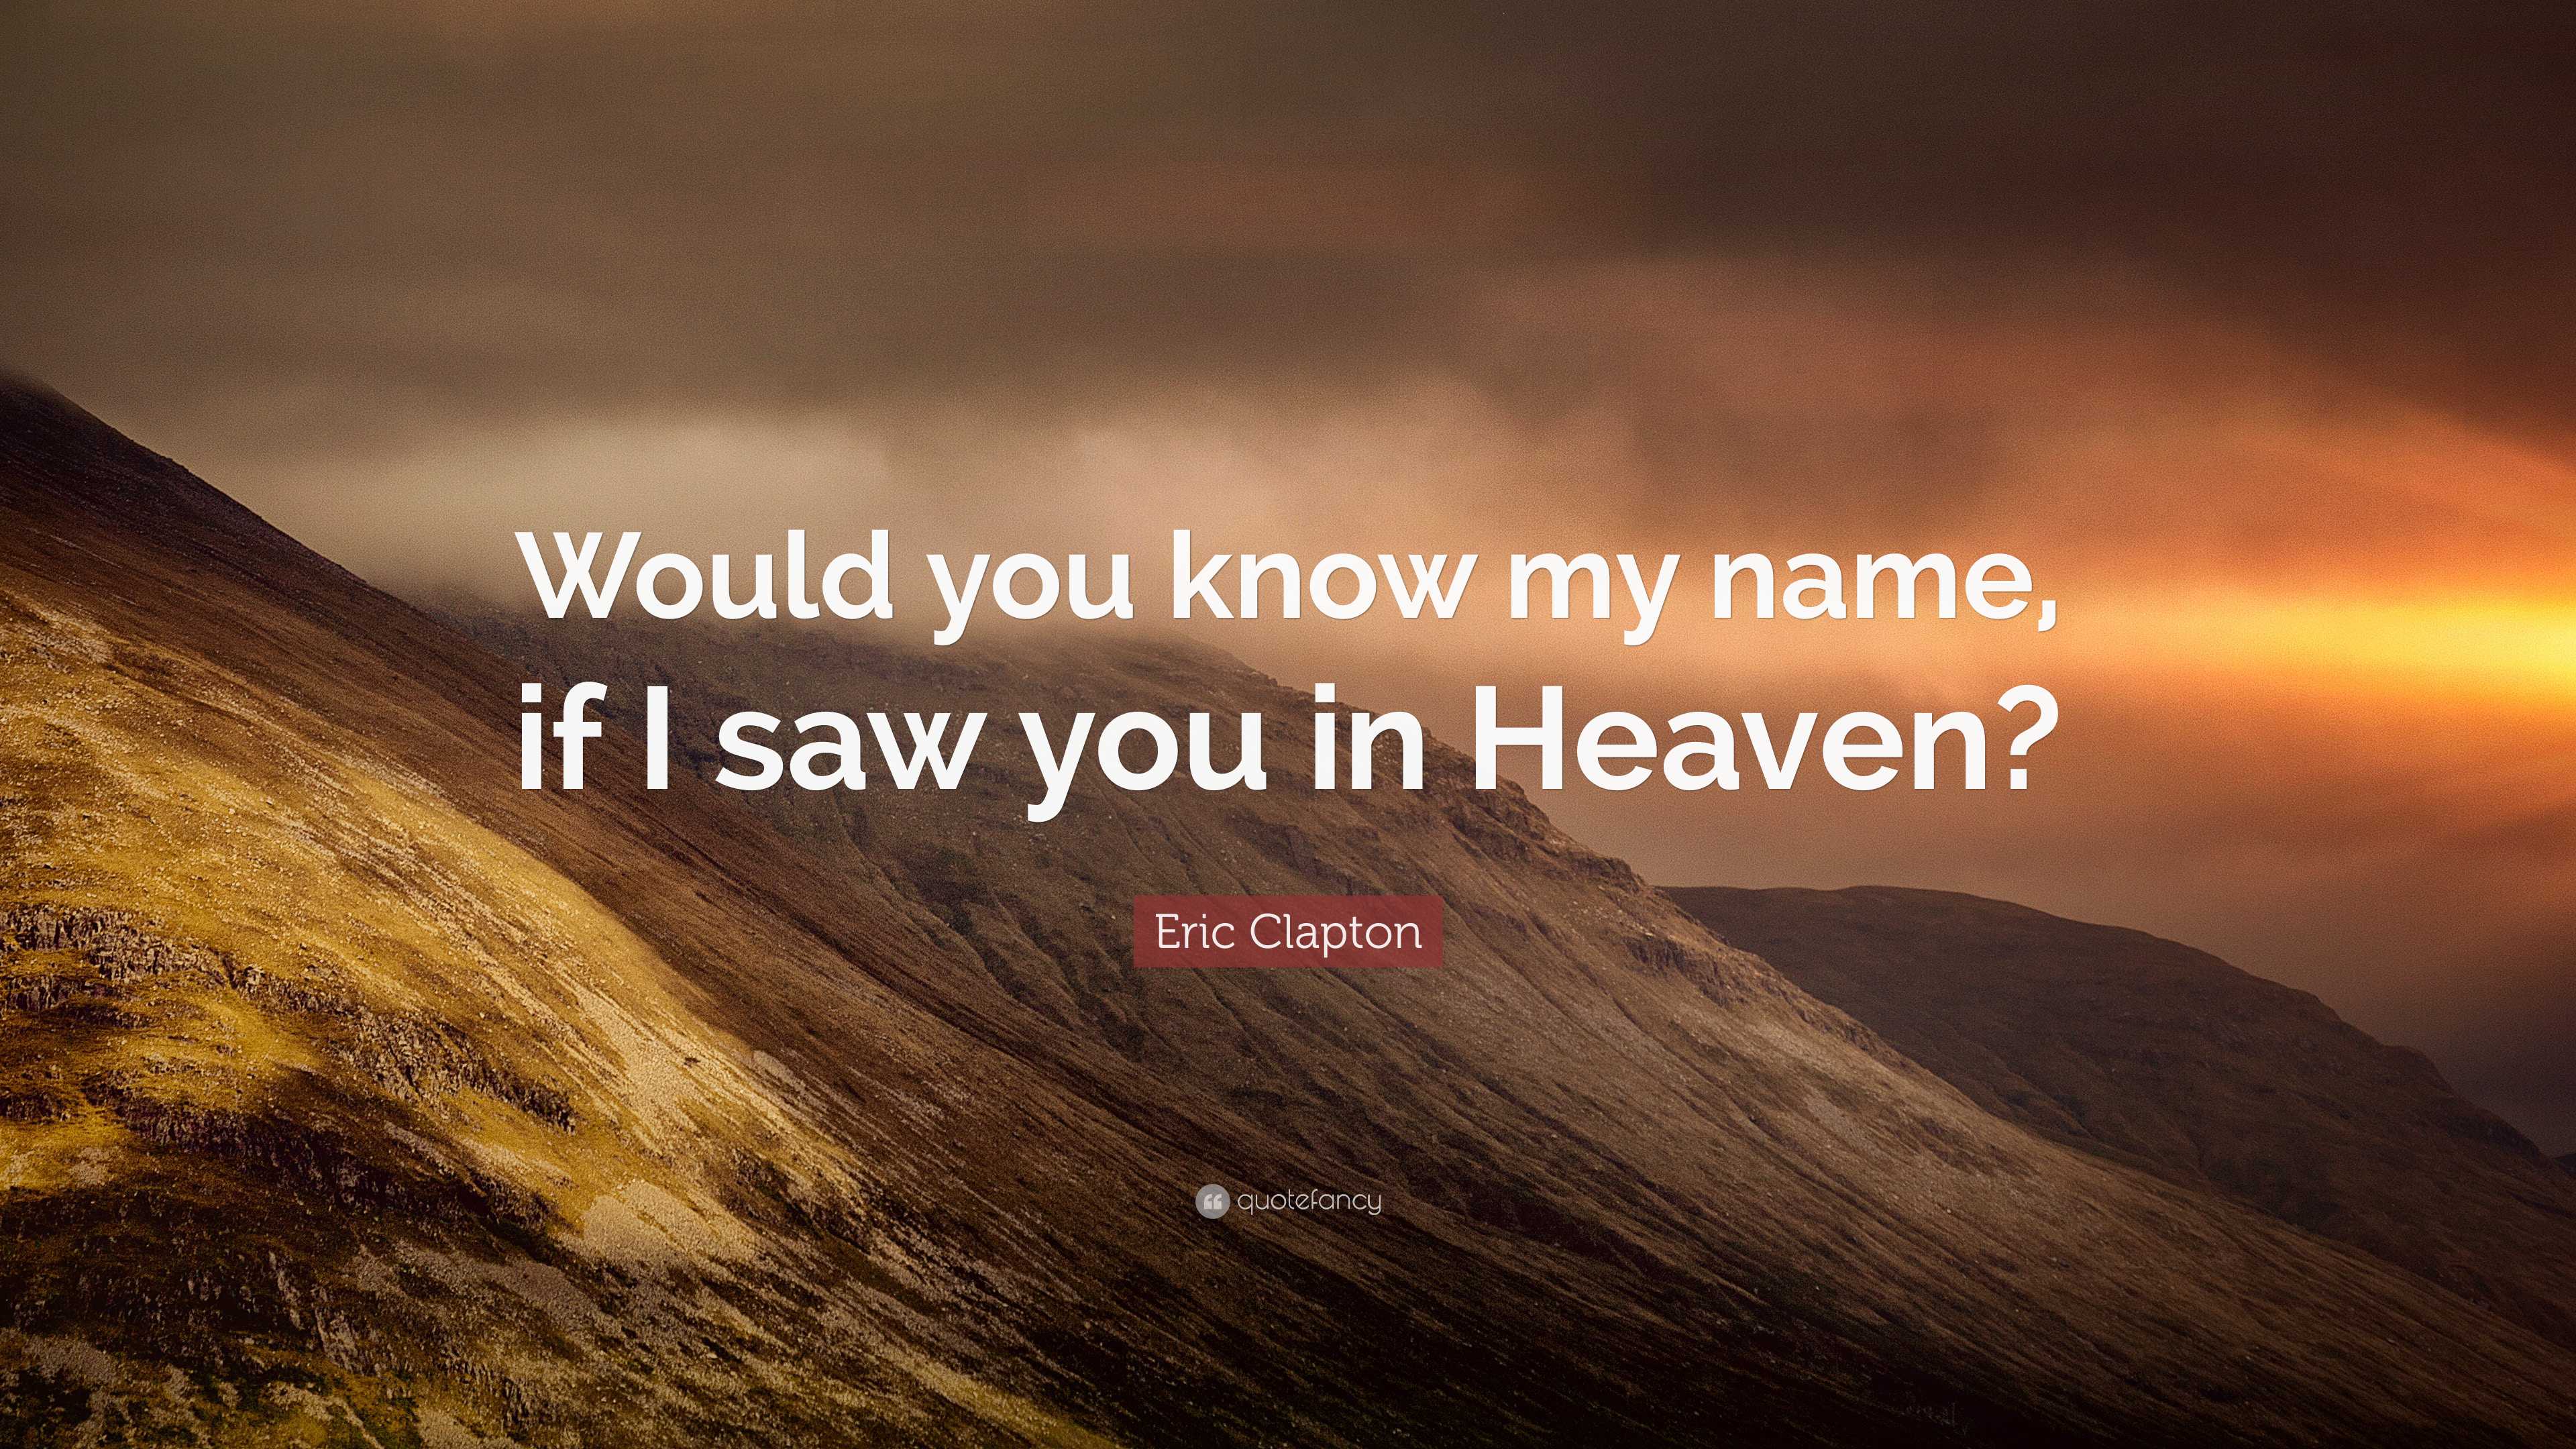 If I Saw You In Heaven, Eric Clapton